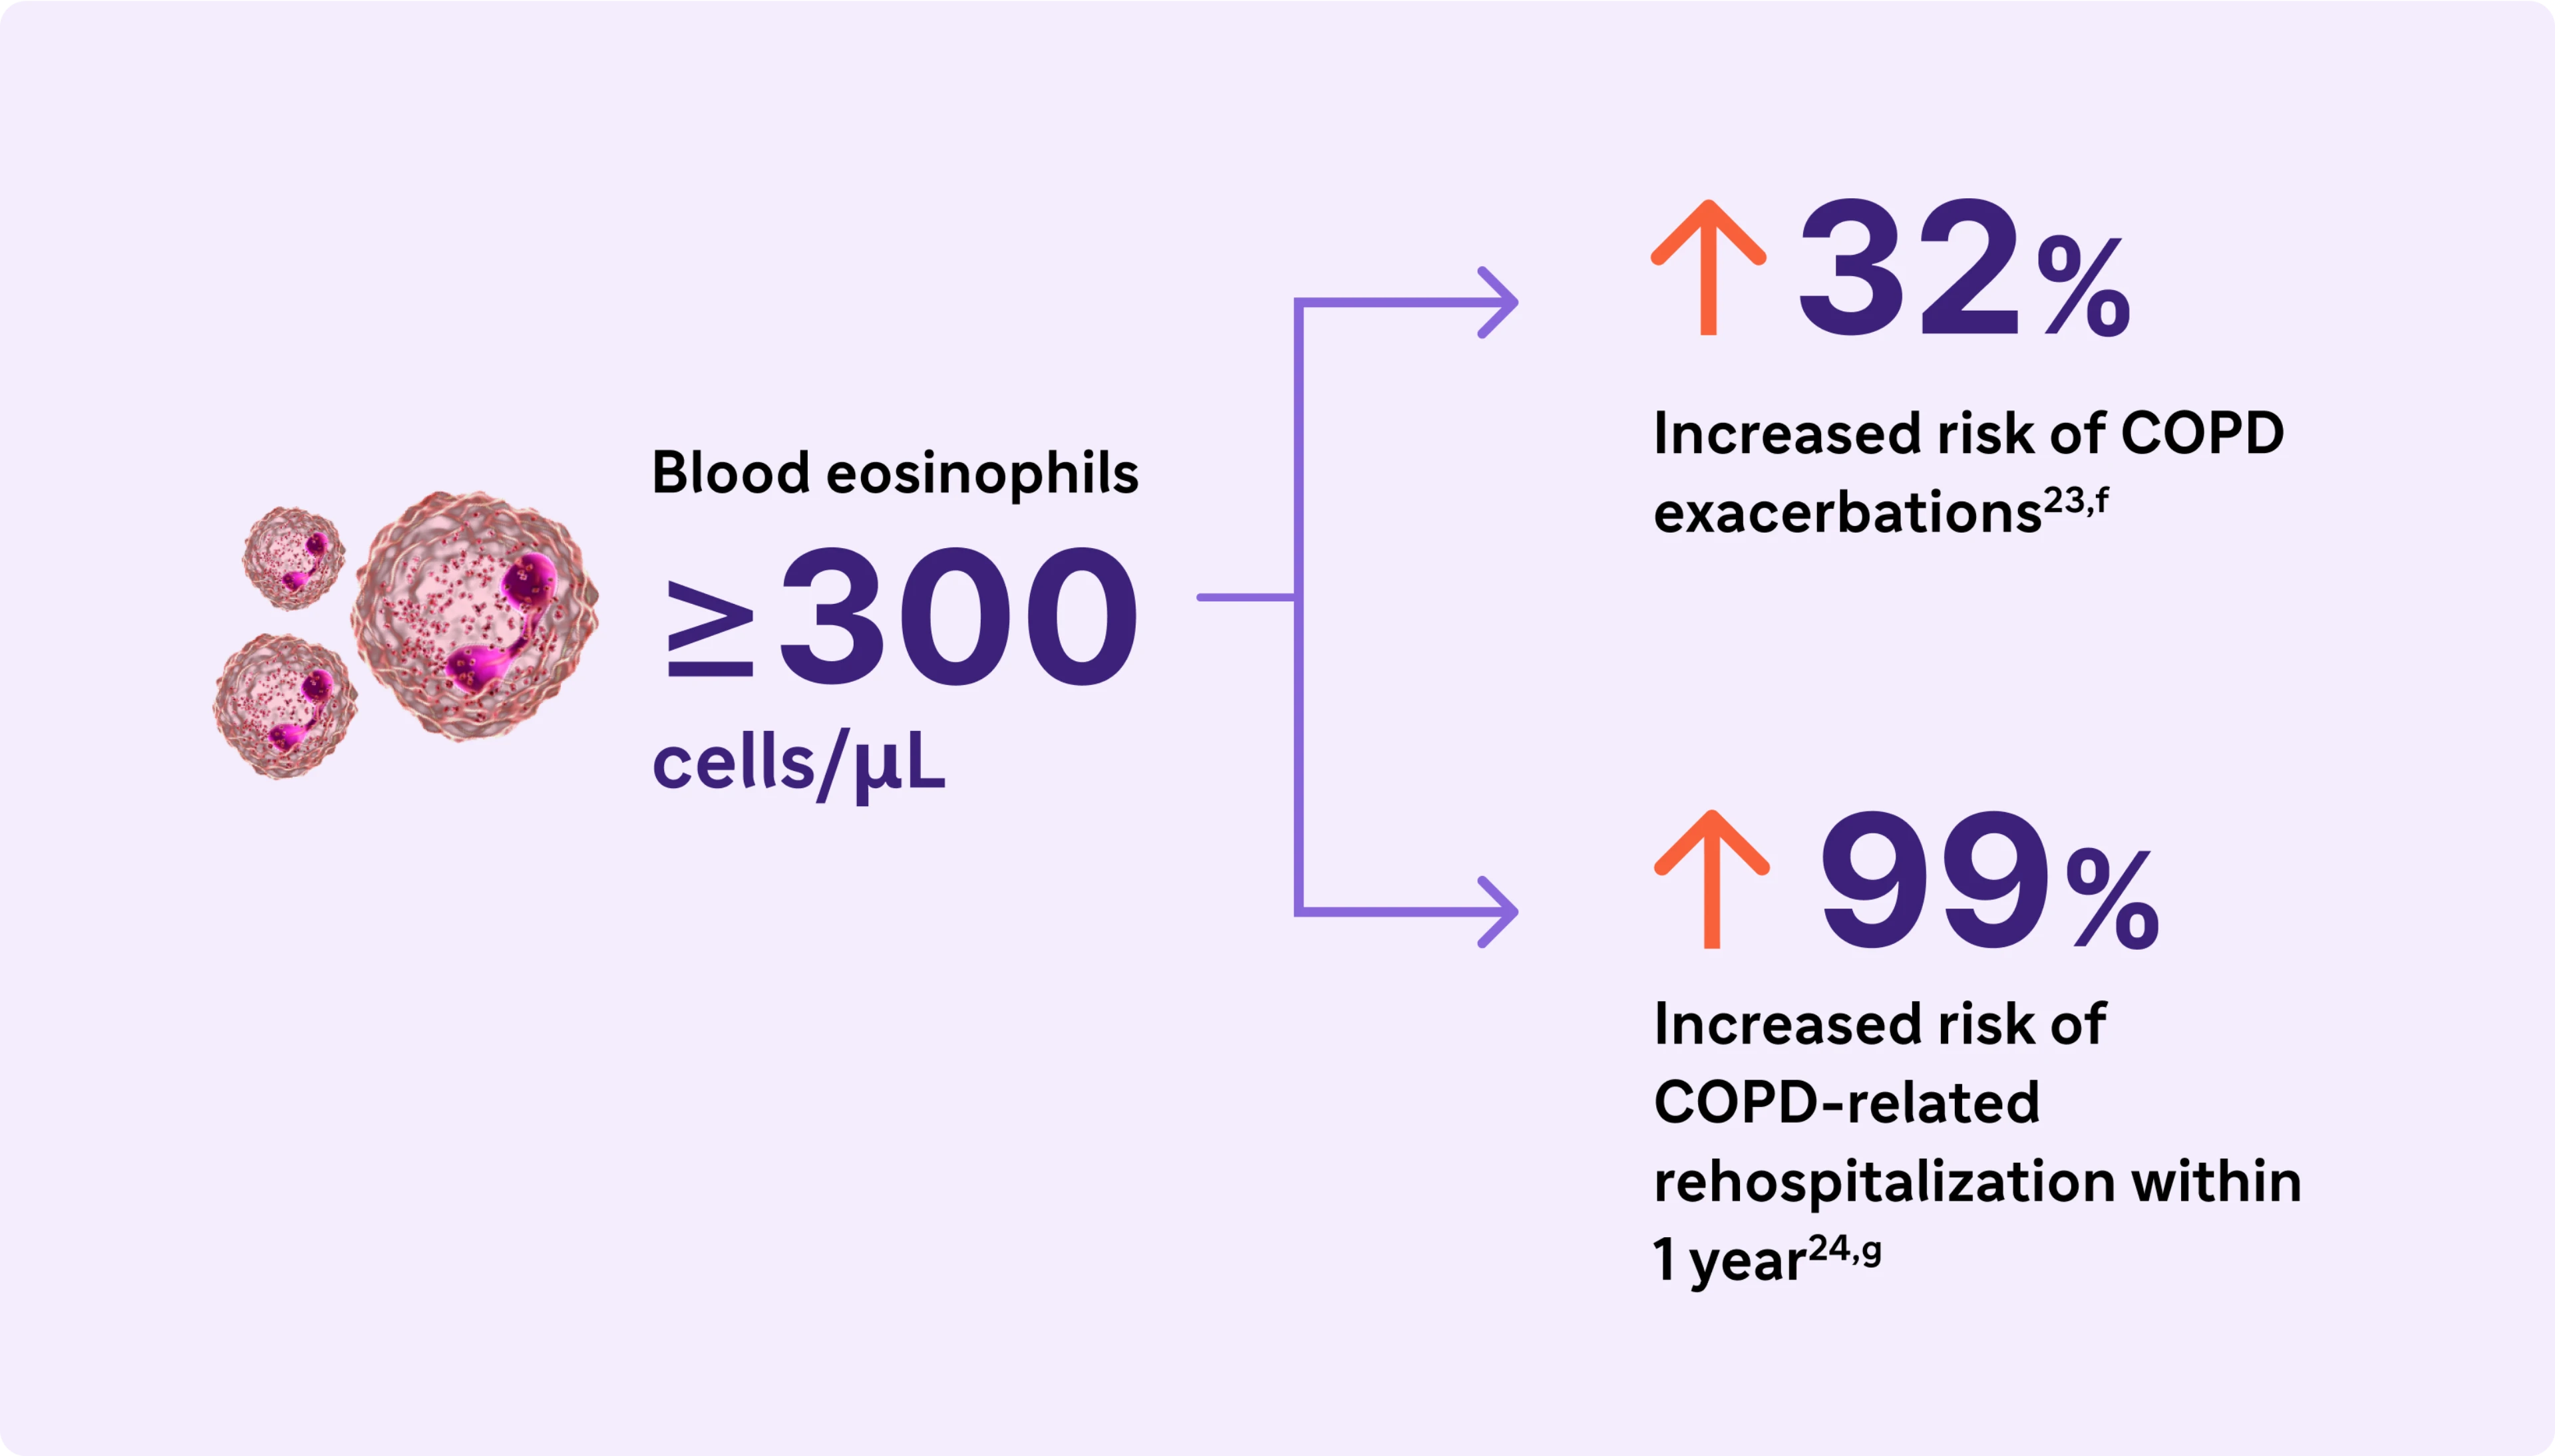 If Blood eosinophils > 300 cells/microL, 32% increased risk of exacerbations and 99% increased risk of rehospitalization